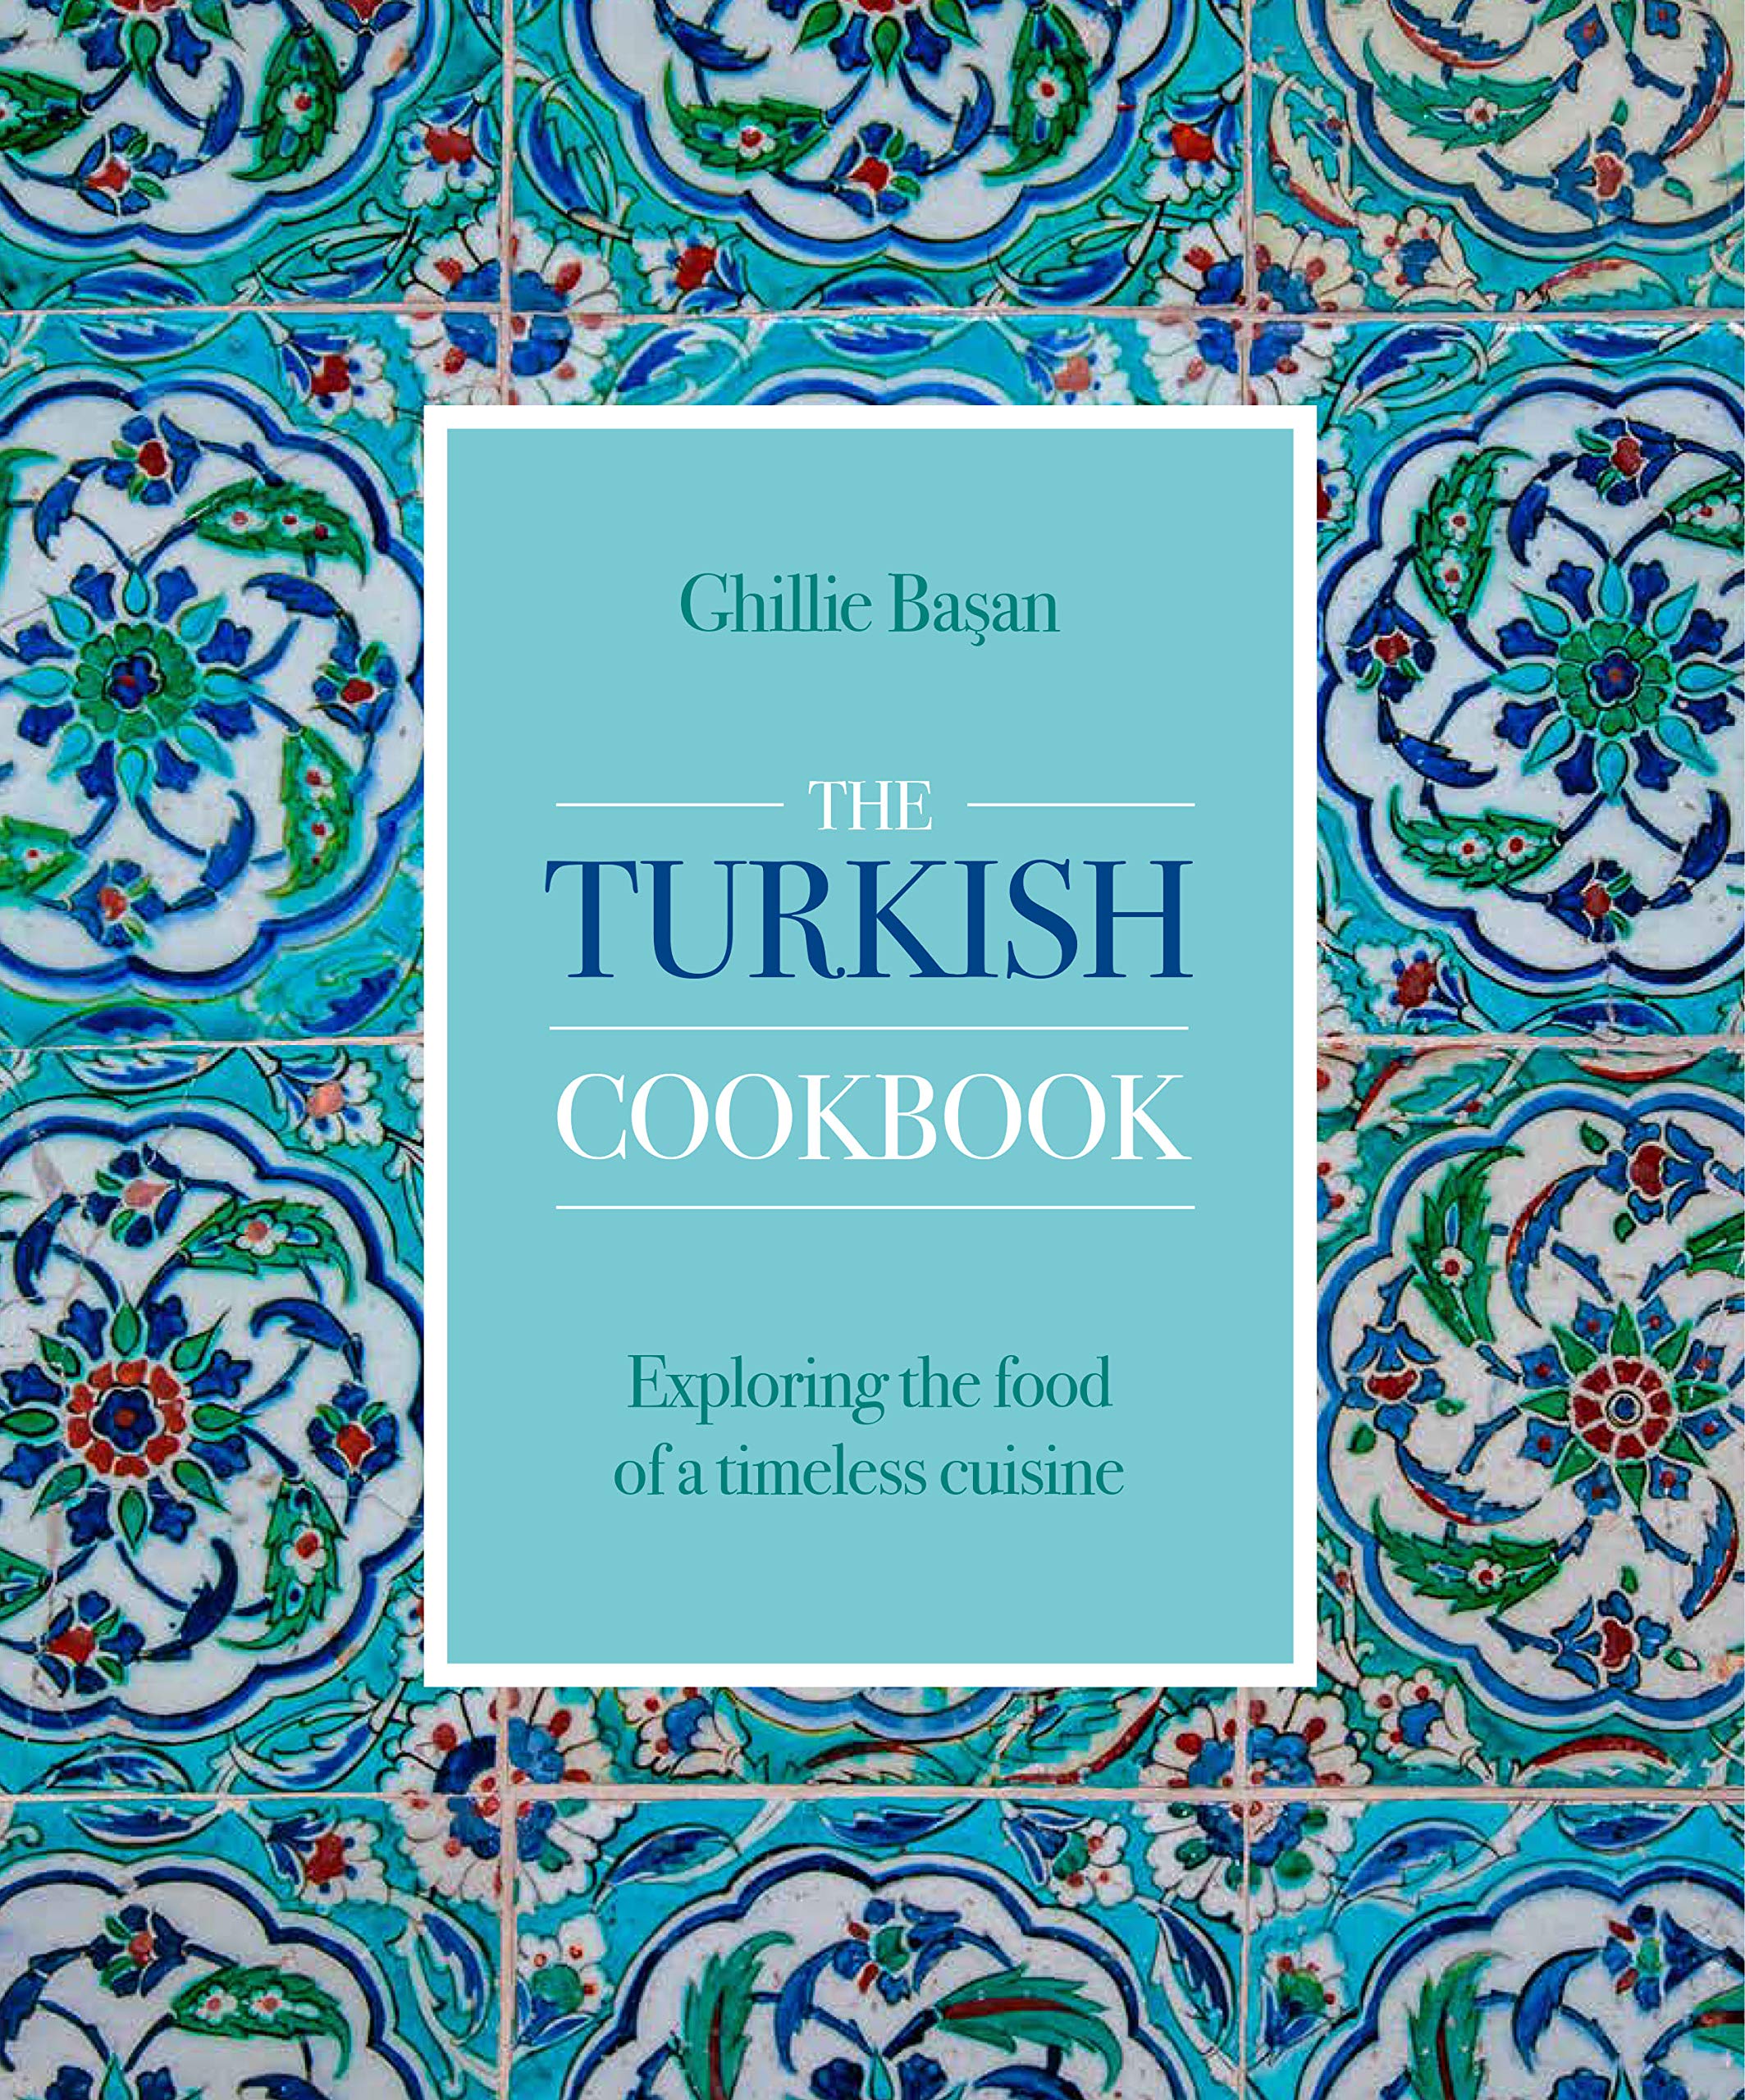 The Turkish Cookbook: Exploring the Food of a Timeless Cuisine (Ghillie Basan)